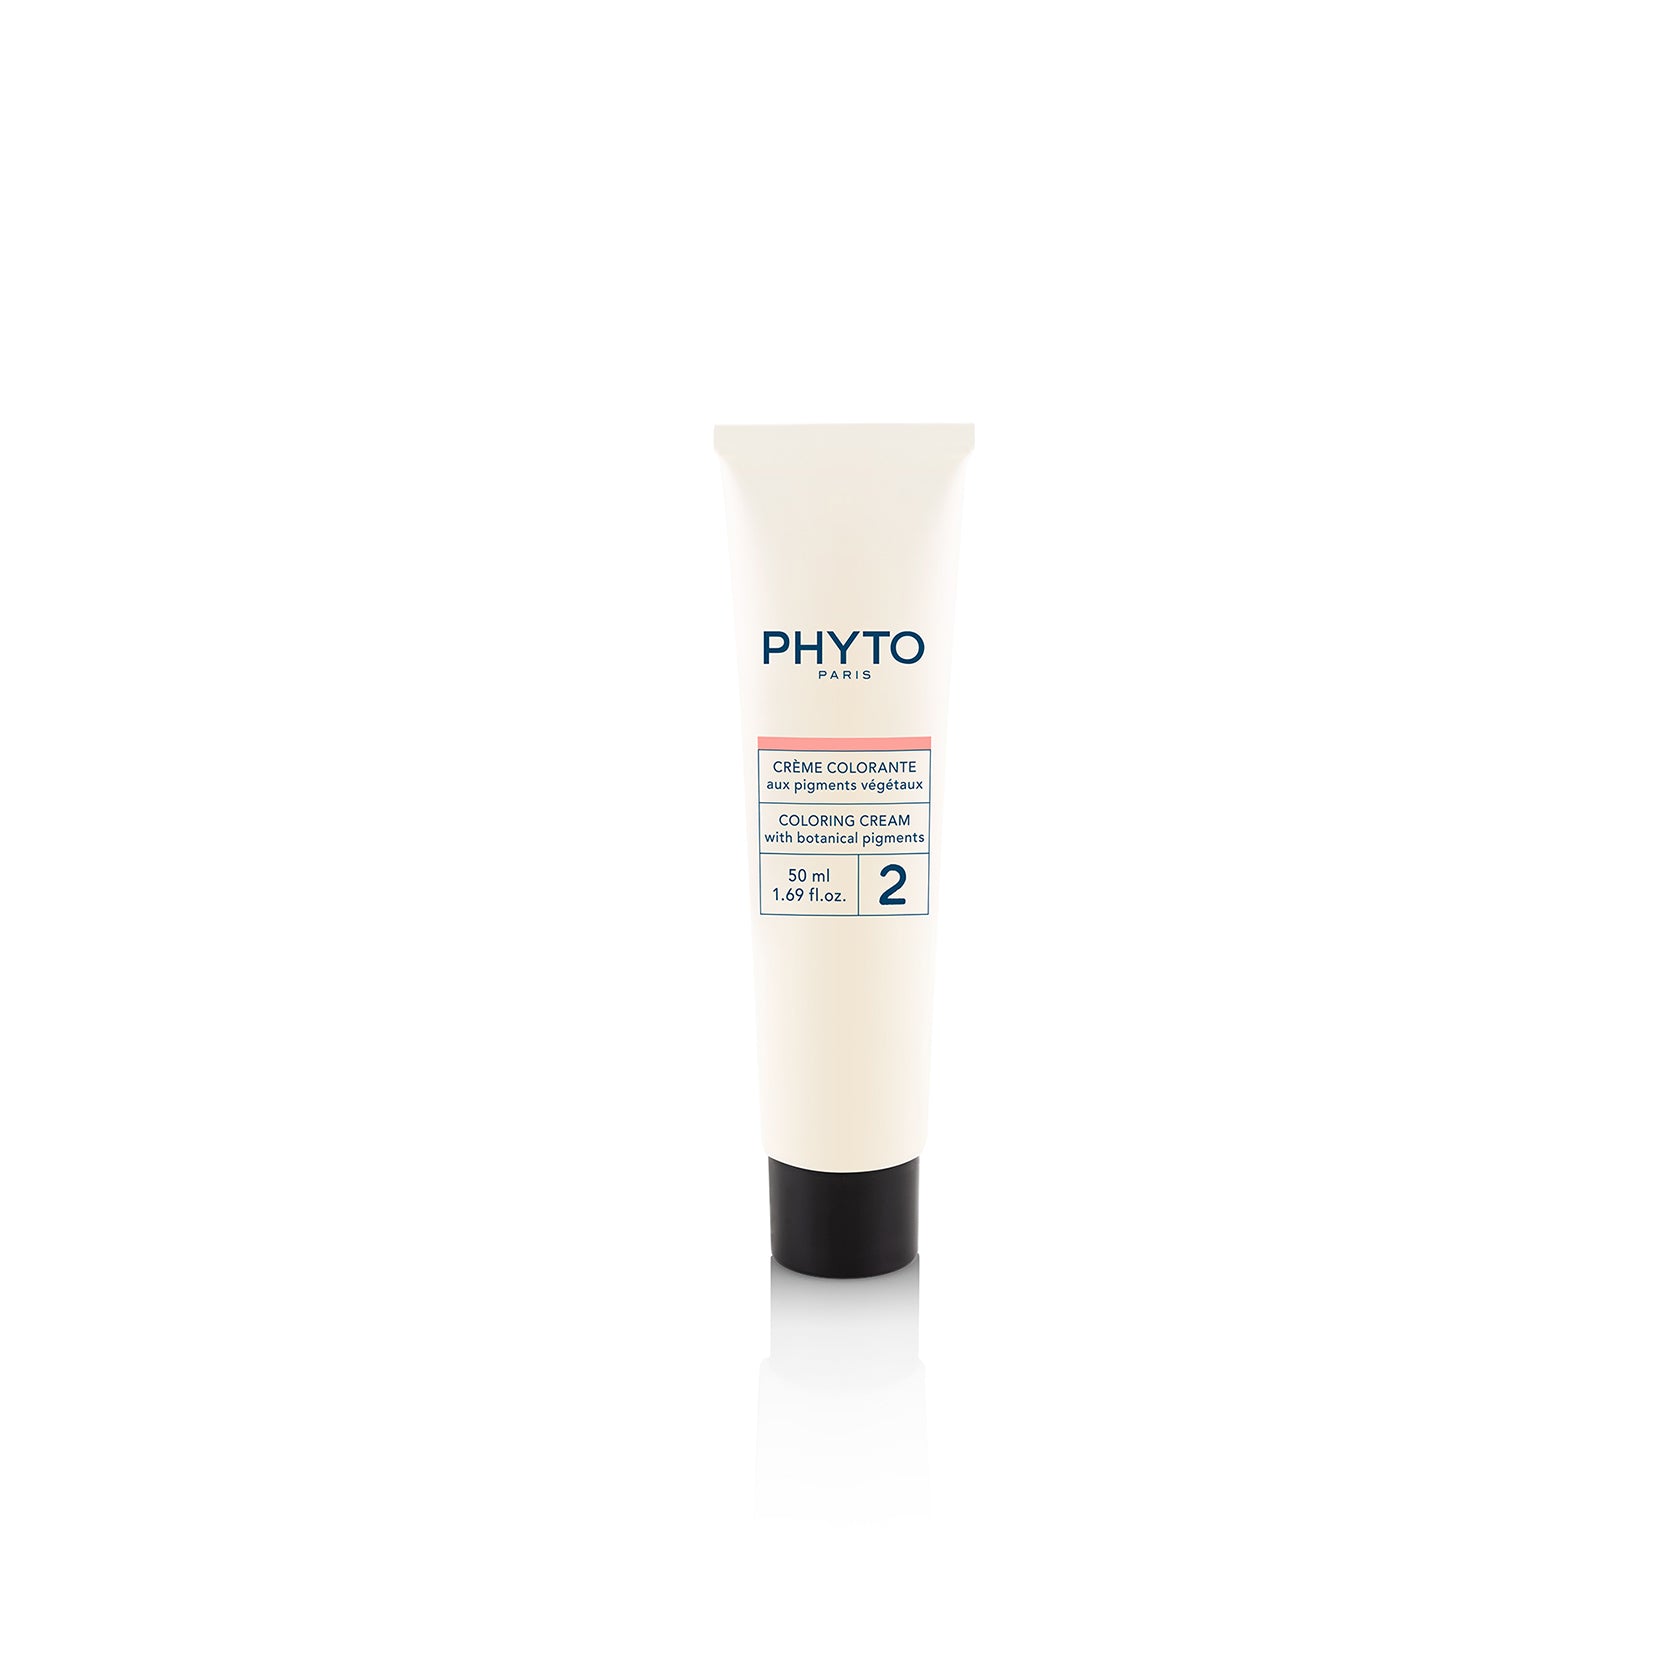 Phytocolor Permanent Color Shade 9.8 Very Light Beige Blonde